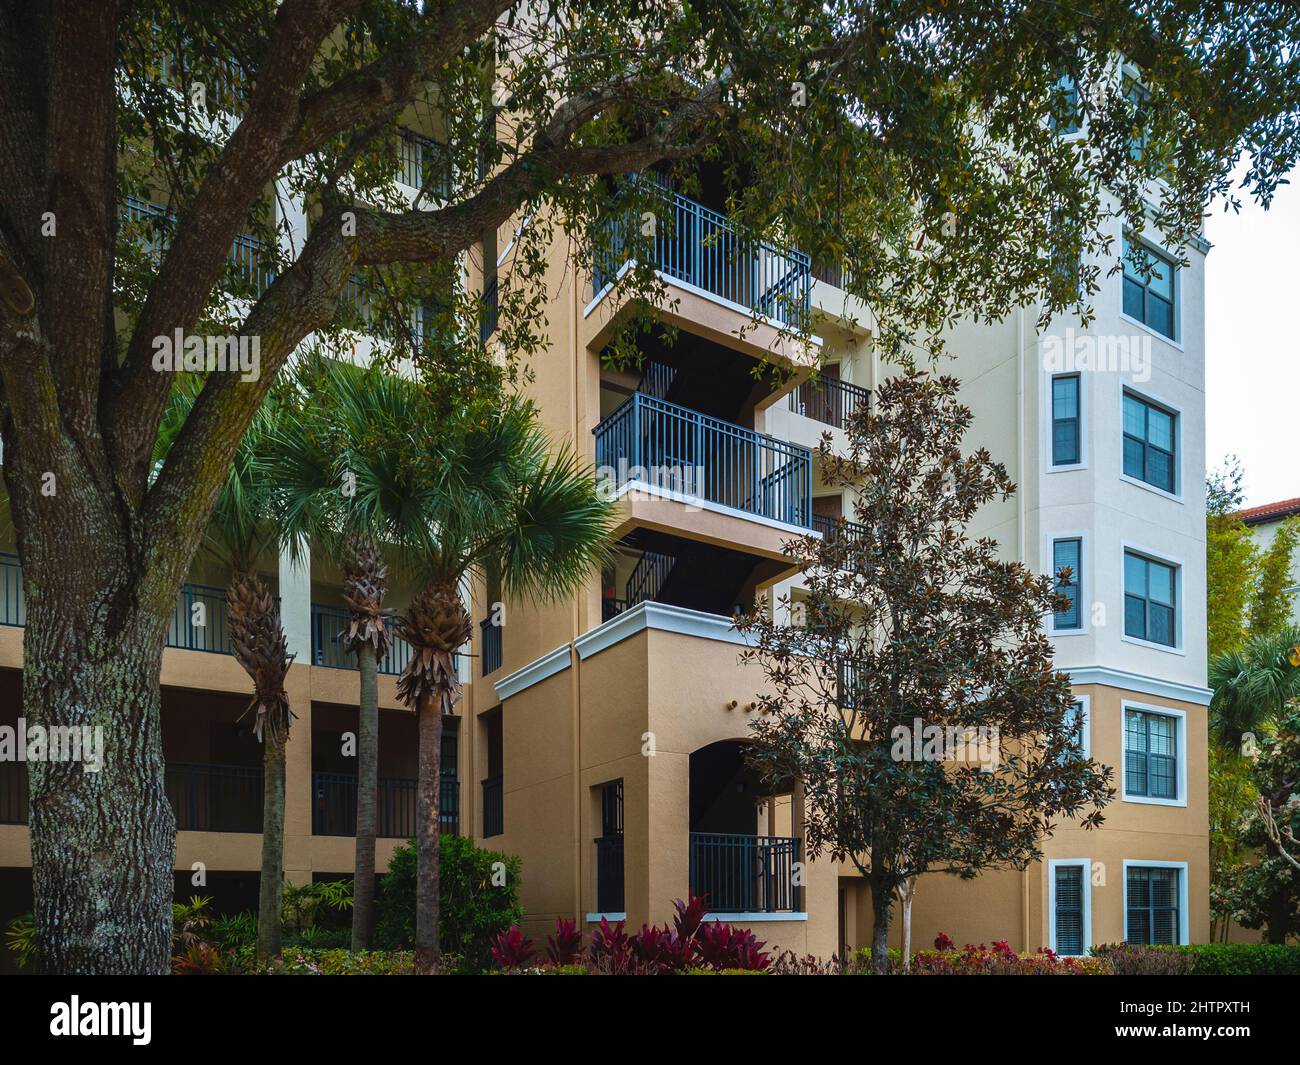 Kissimmee, Florida - February 6, 2022: Closeup View of Apartment Building in Holiday Inn Resort. Stock Photo